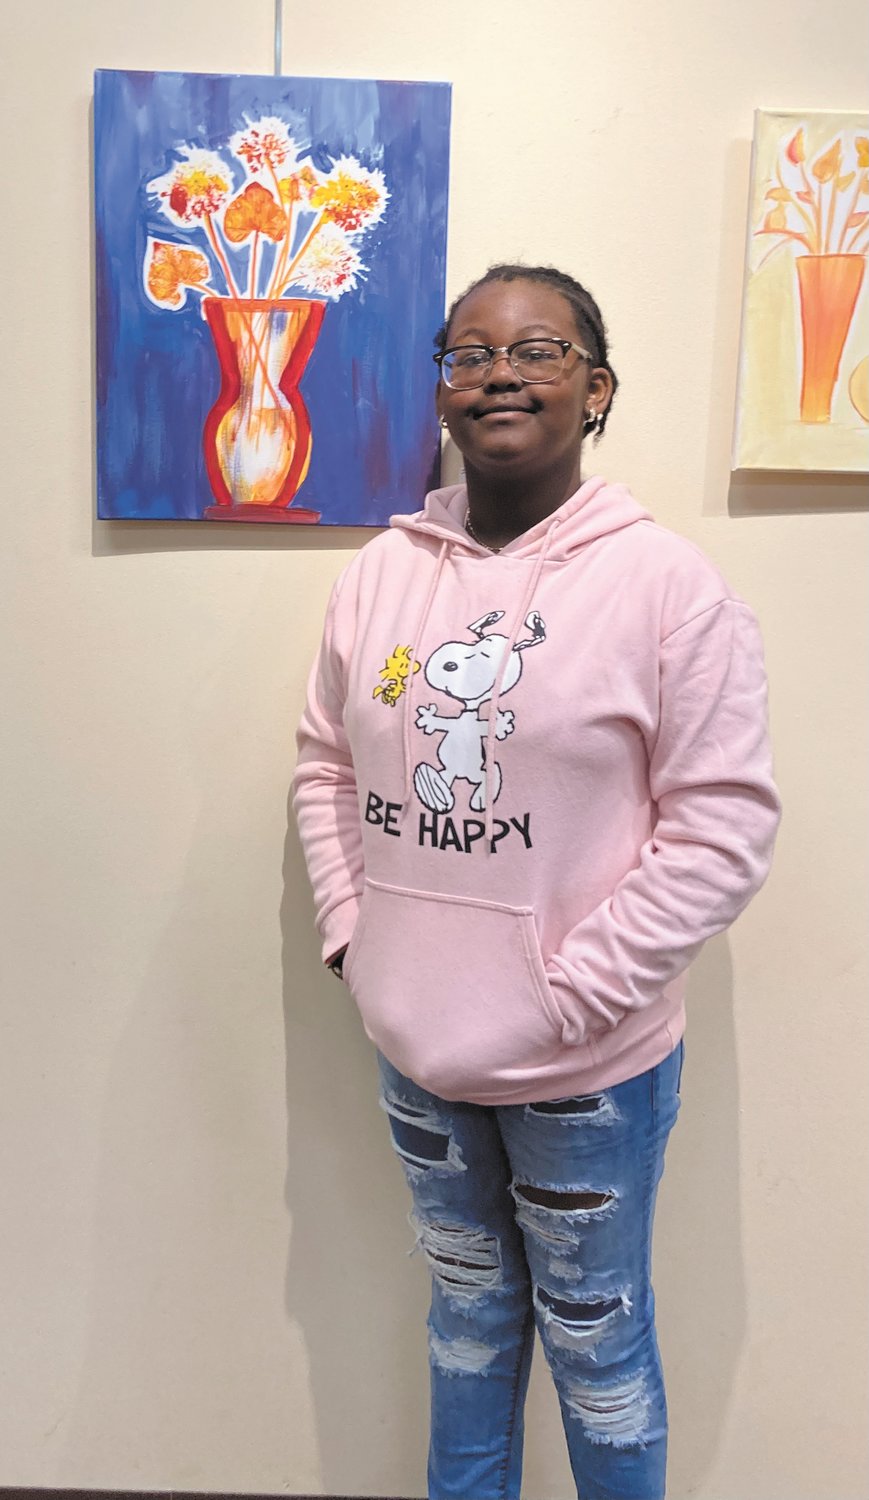 FUN AND CREATIVE: Isabellee Jolivert, 10, has attended Esperanza Hope’s art program for the past three years. Out of all the artwork she completed this past October, this piece is her favorite.